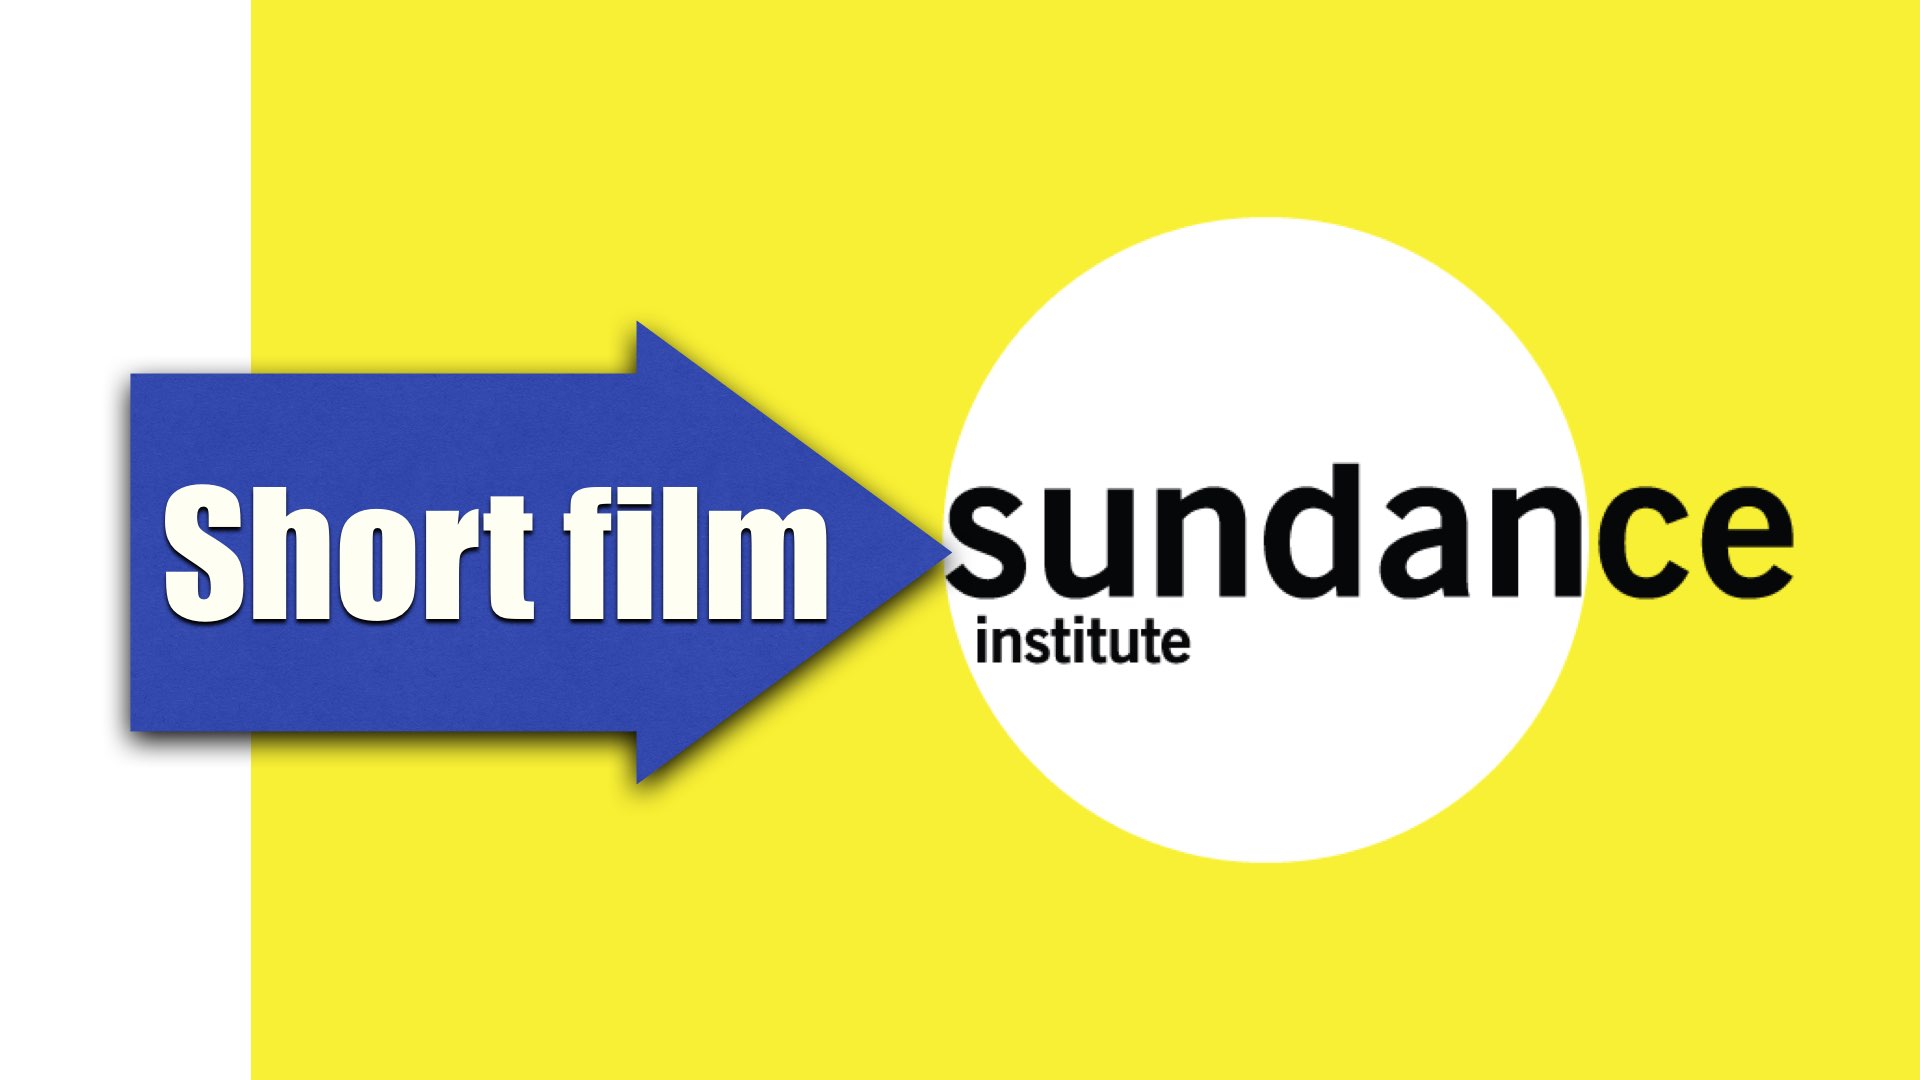 Sundance Film Festival- How to get accepted